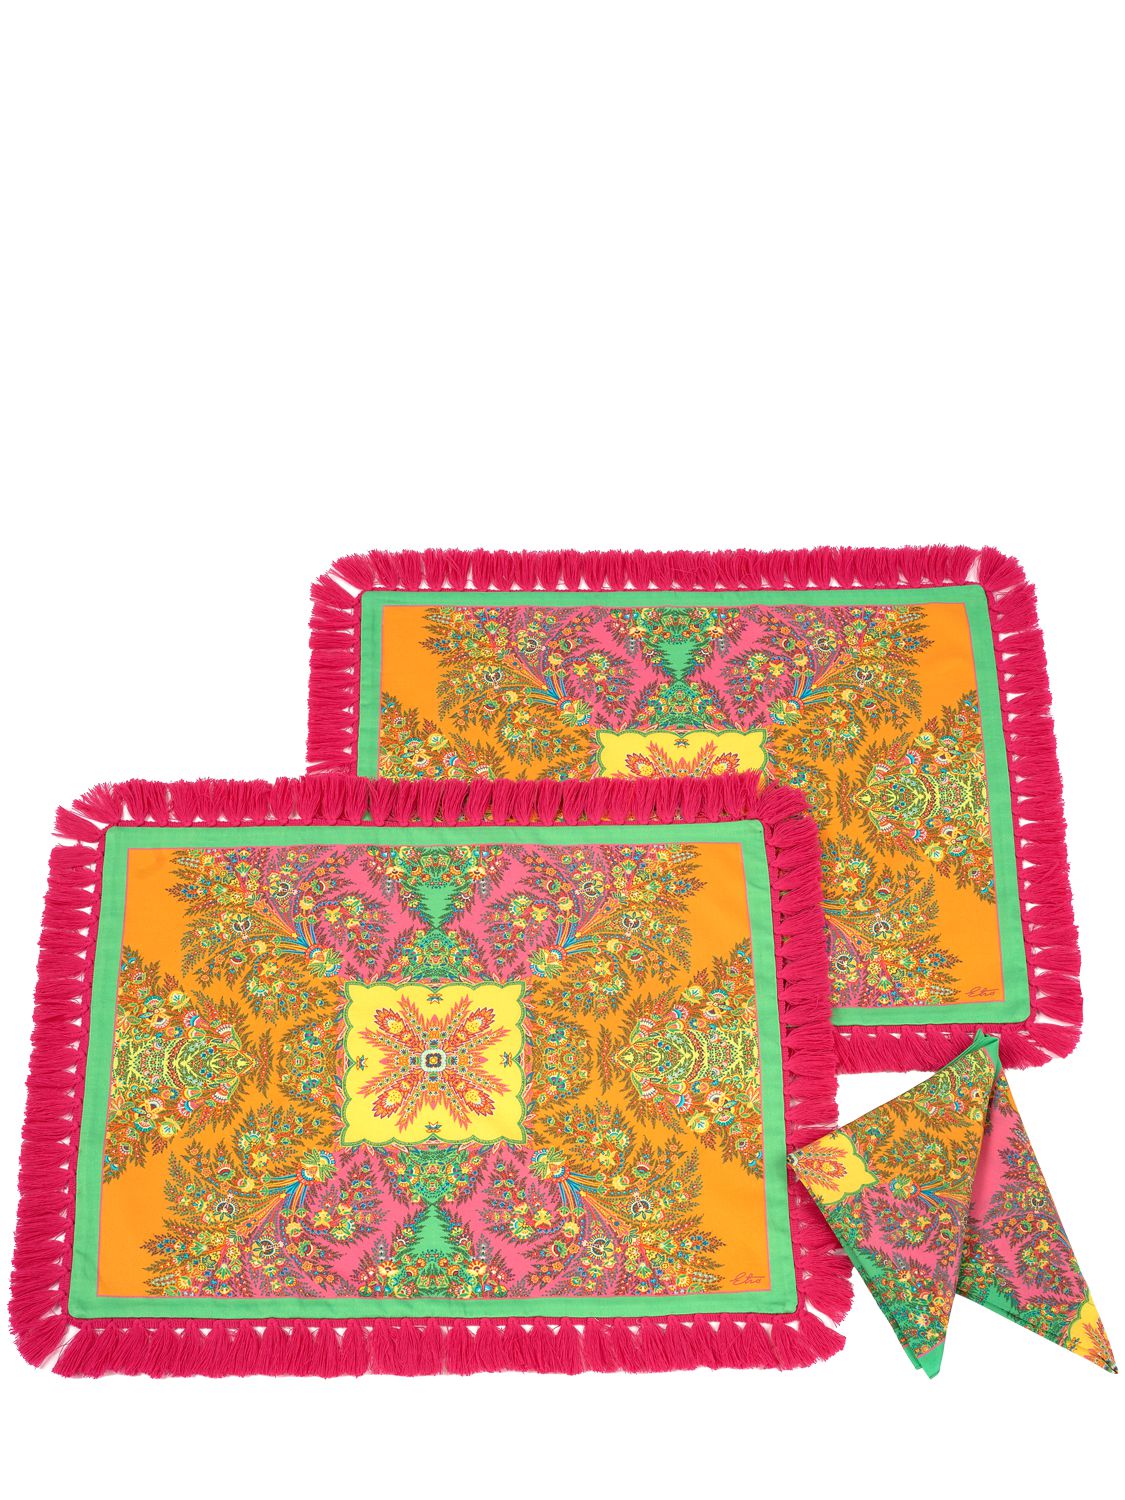 Etro Jaisalmer Set Of 2 Placemats And Napkins In Multicolor